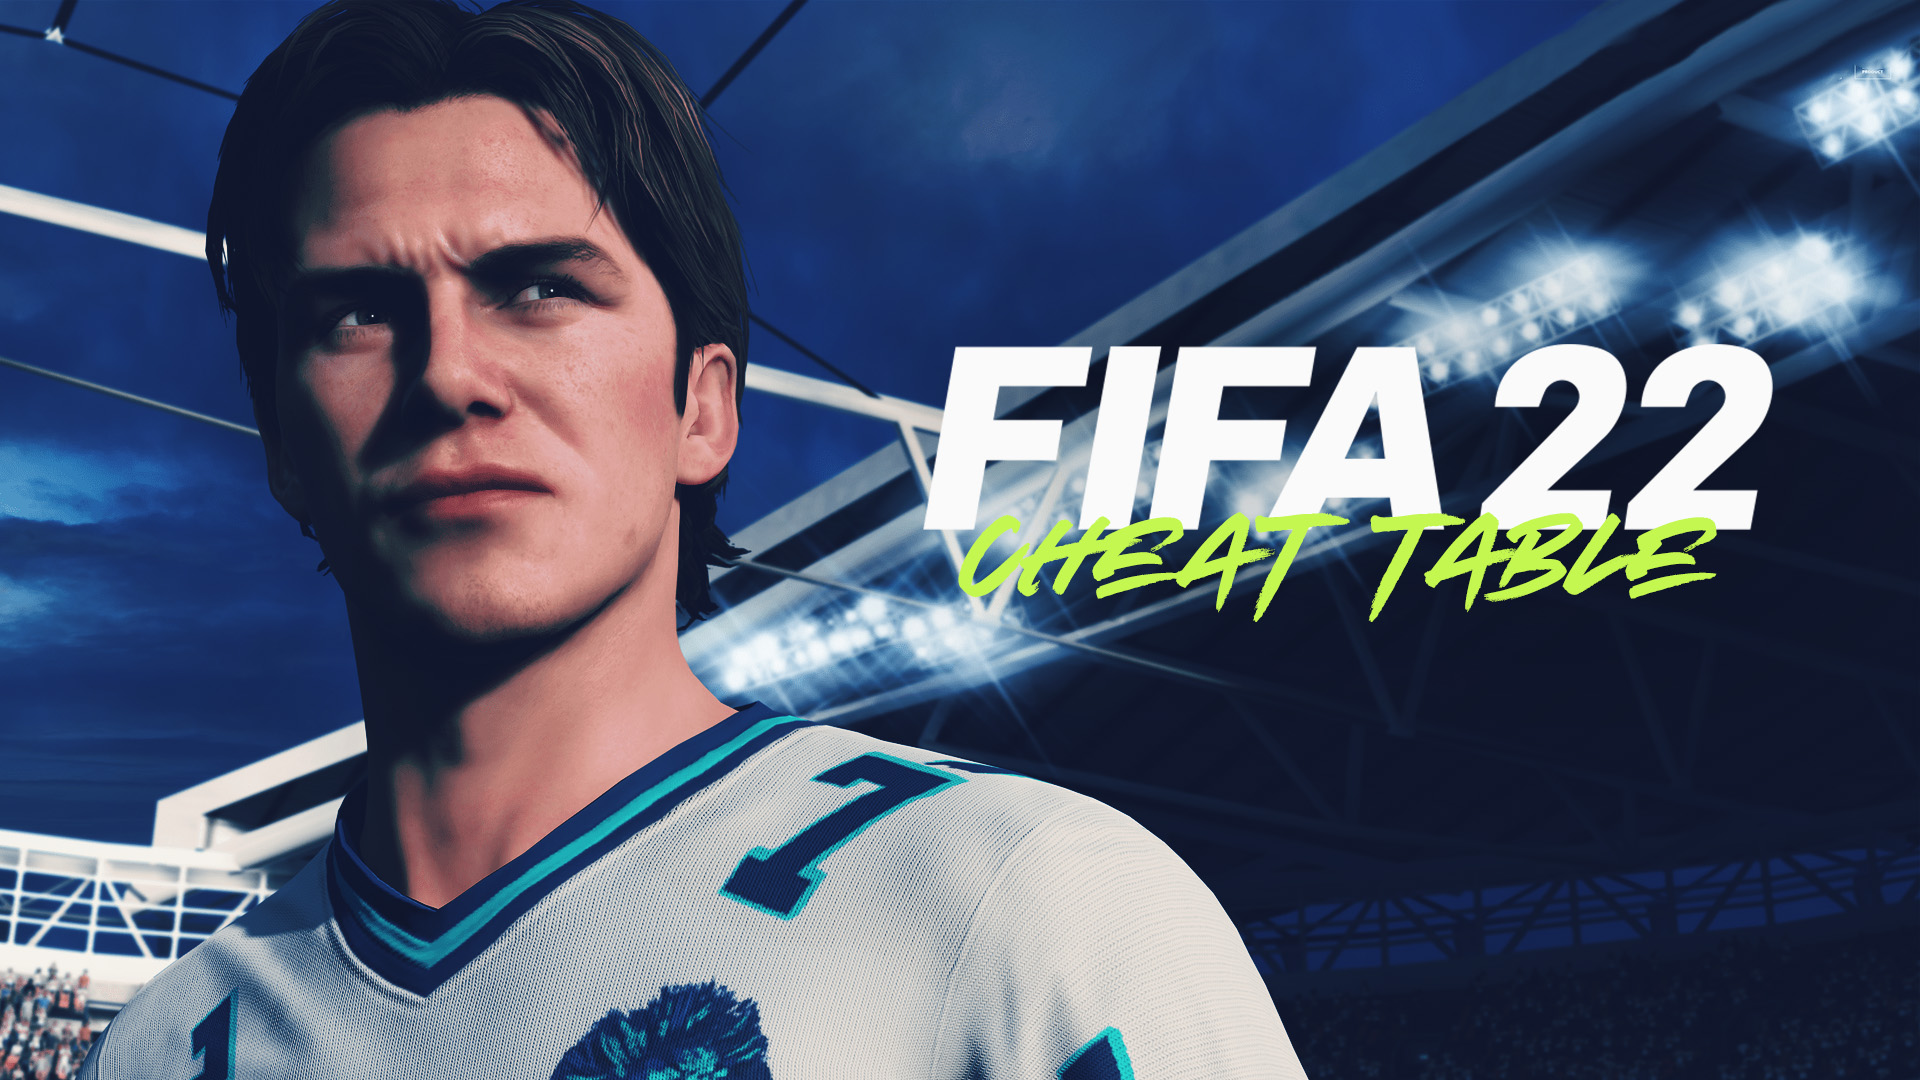 FIFA 22 - Page 2 - FearLess Cheat Engine